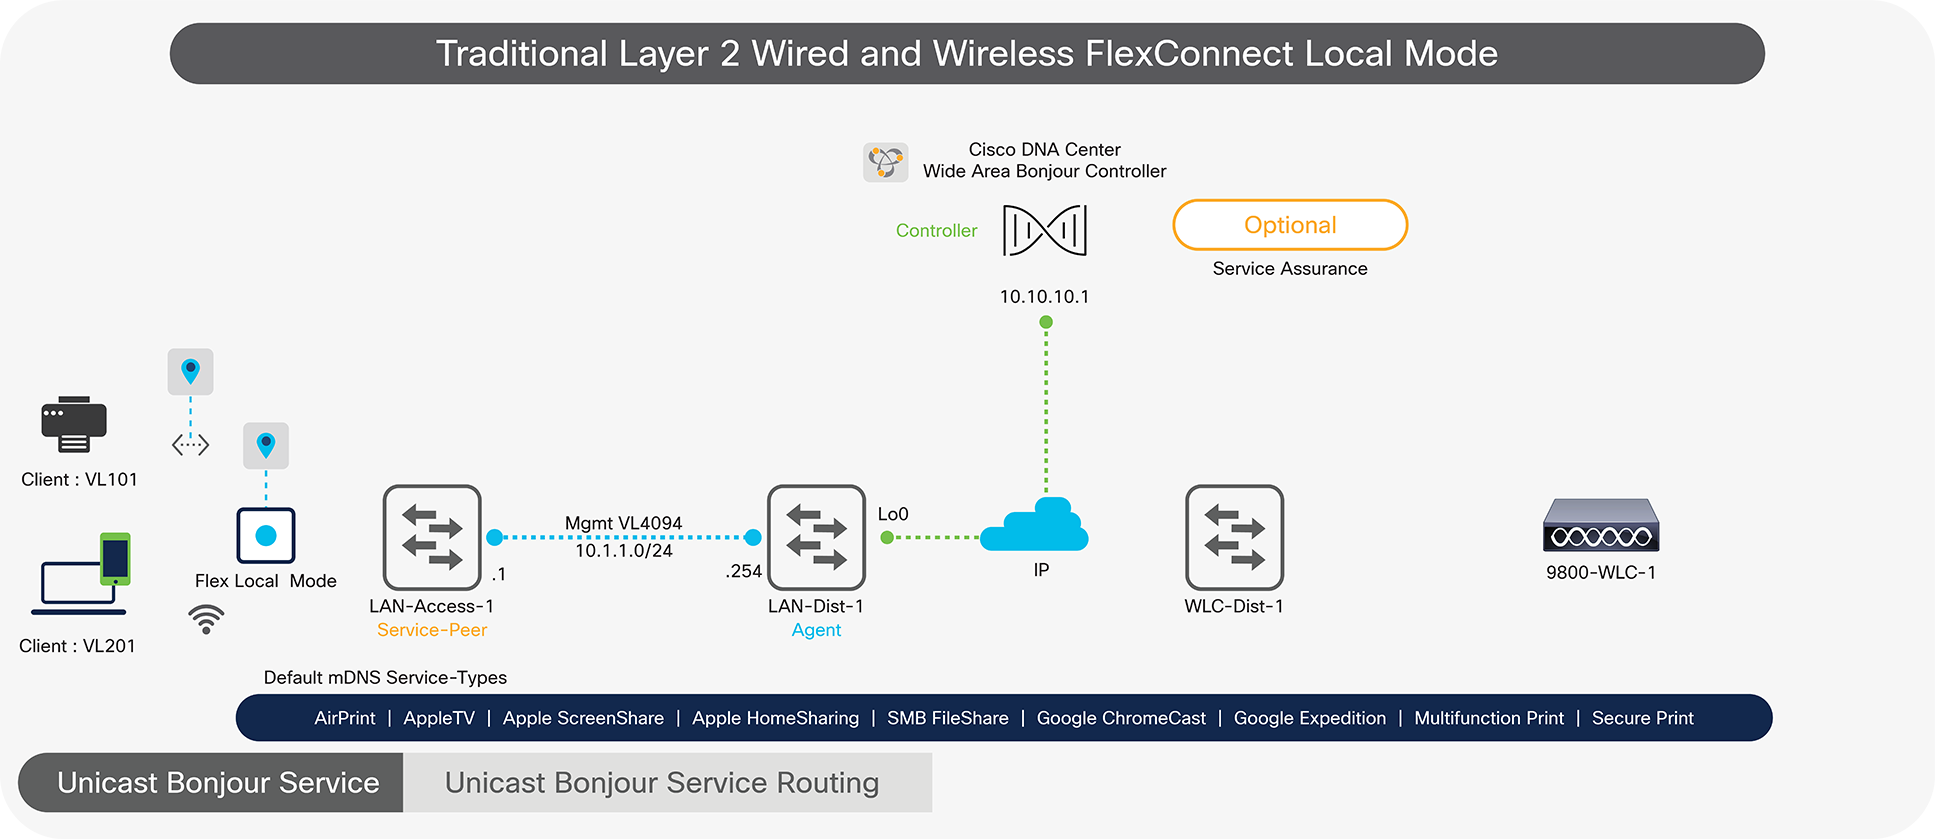 Layer 2 LAN Access and Wireless Local Mode